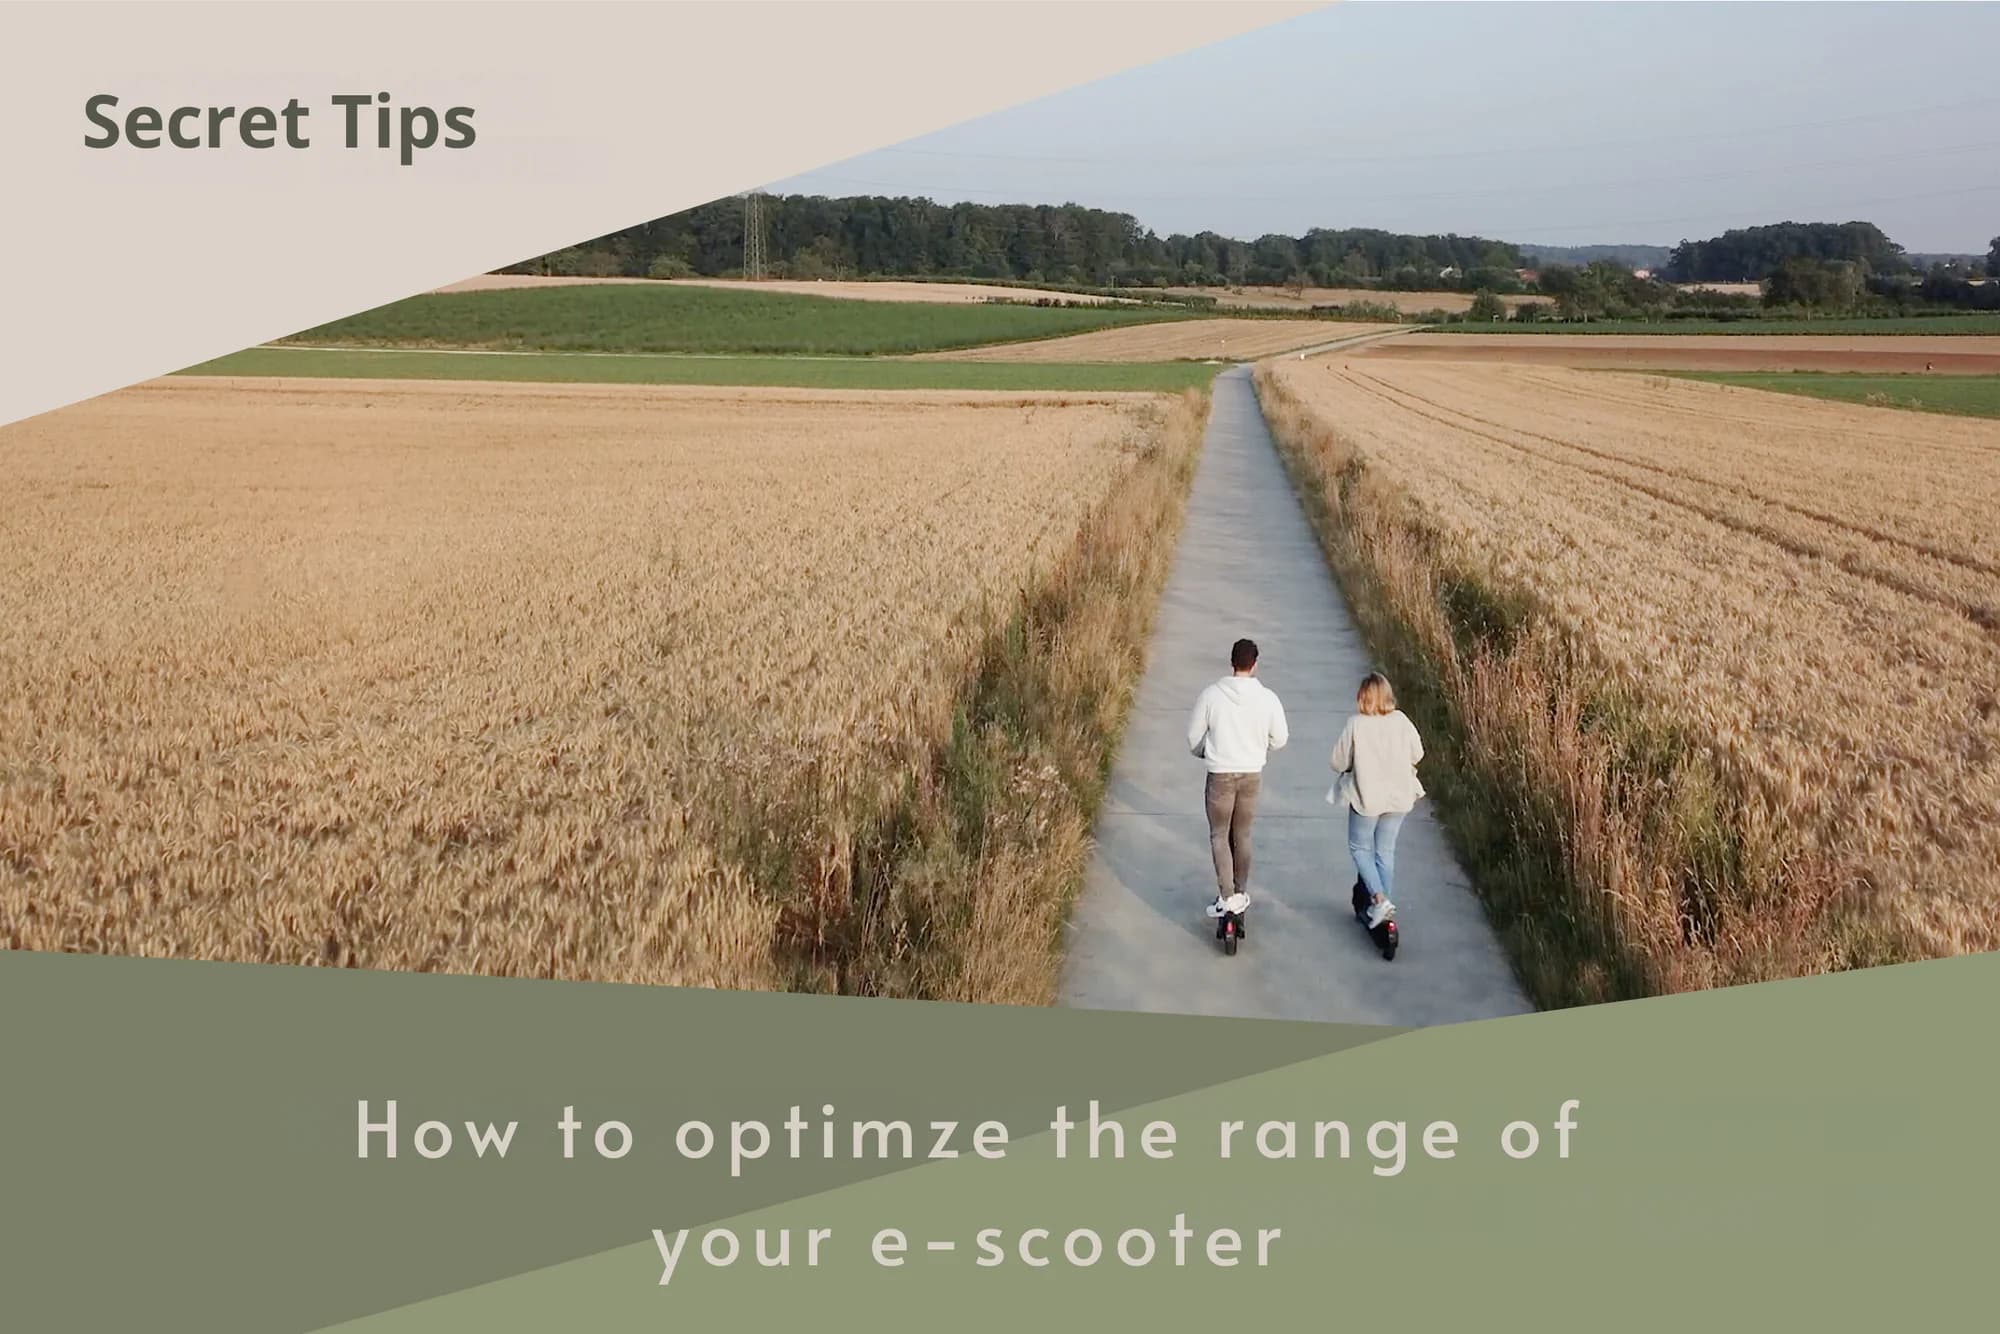 HOW TO MAXIMIZE THE RANGE OF YOUR E-SCOOTER